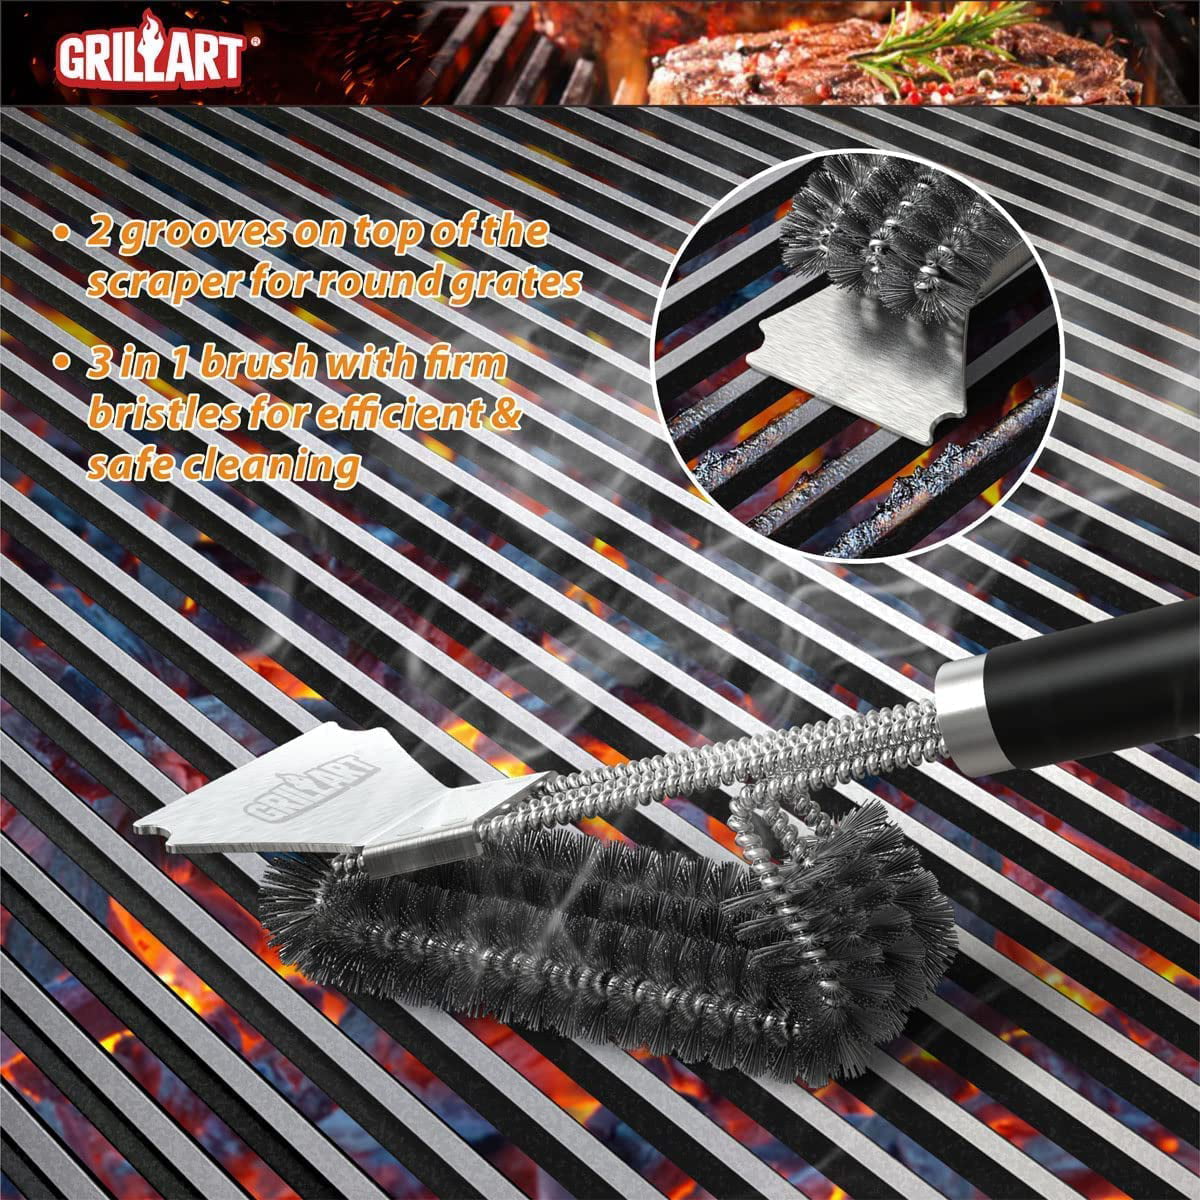 GRILLART Grill Brush and Scraper, Wire BBQ Grill Brush for Outdoor Grill,  16.5” Grill Cleaning Brush BBQ Grill Accessories, Safe Grill Cleaner